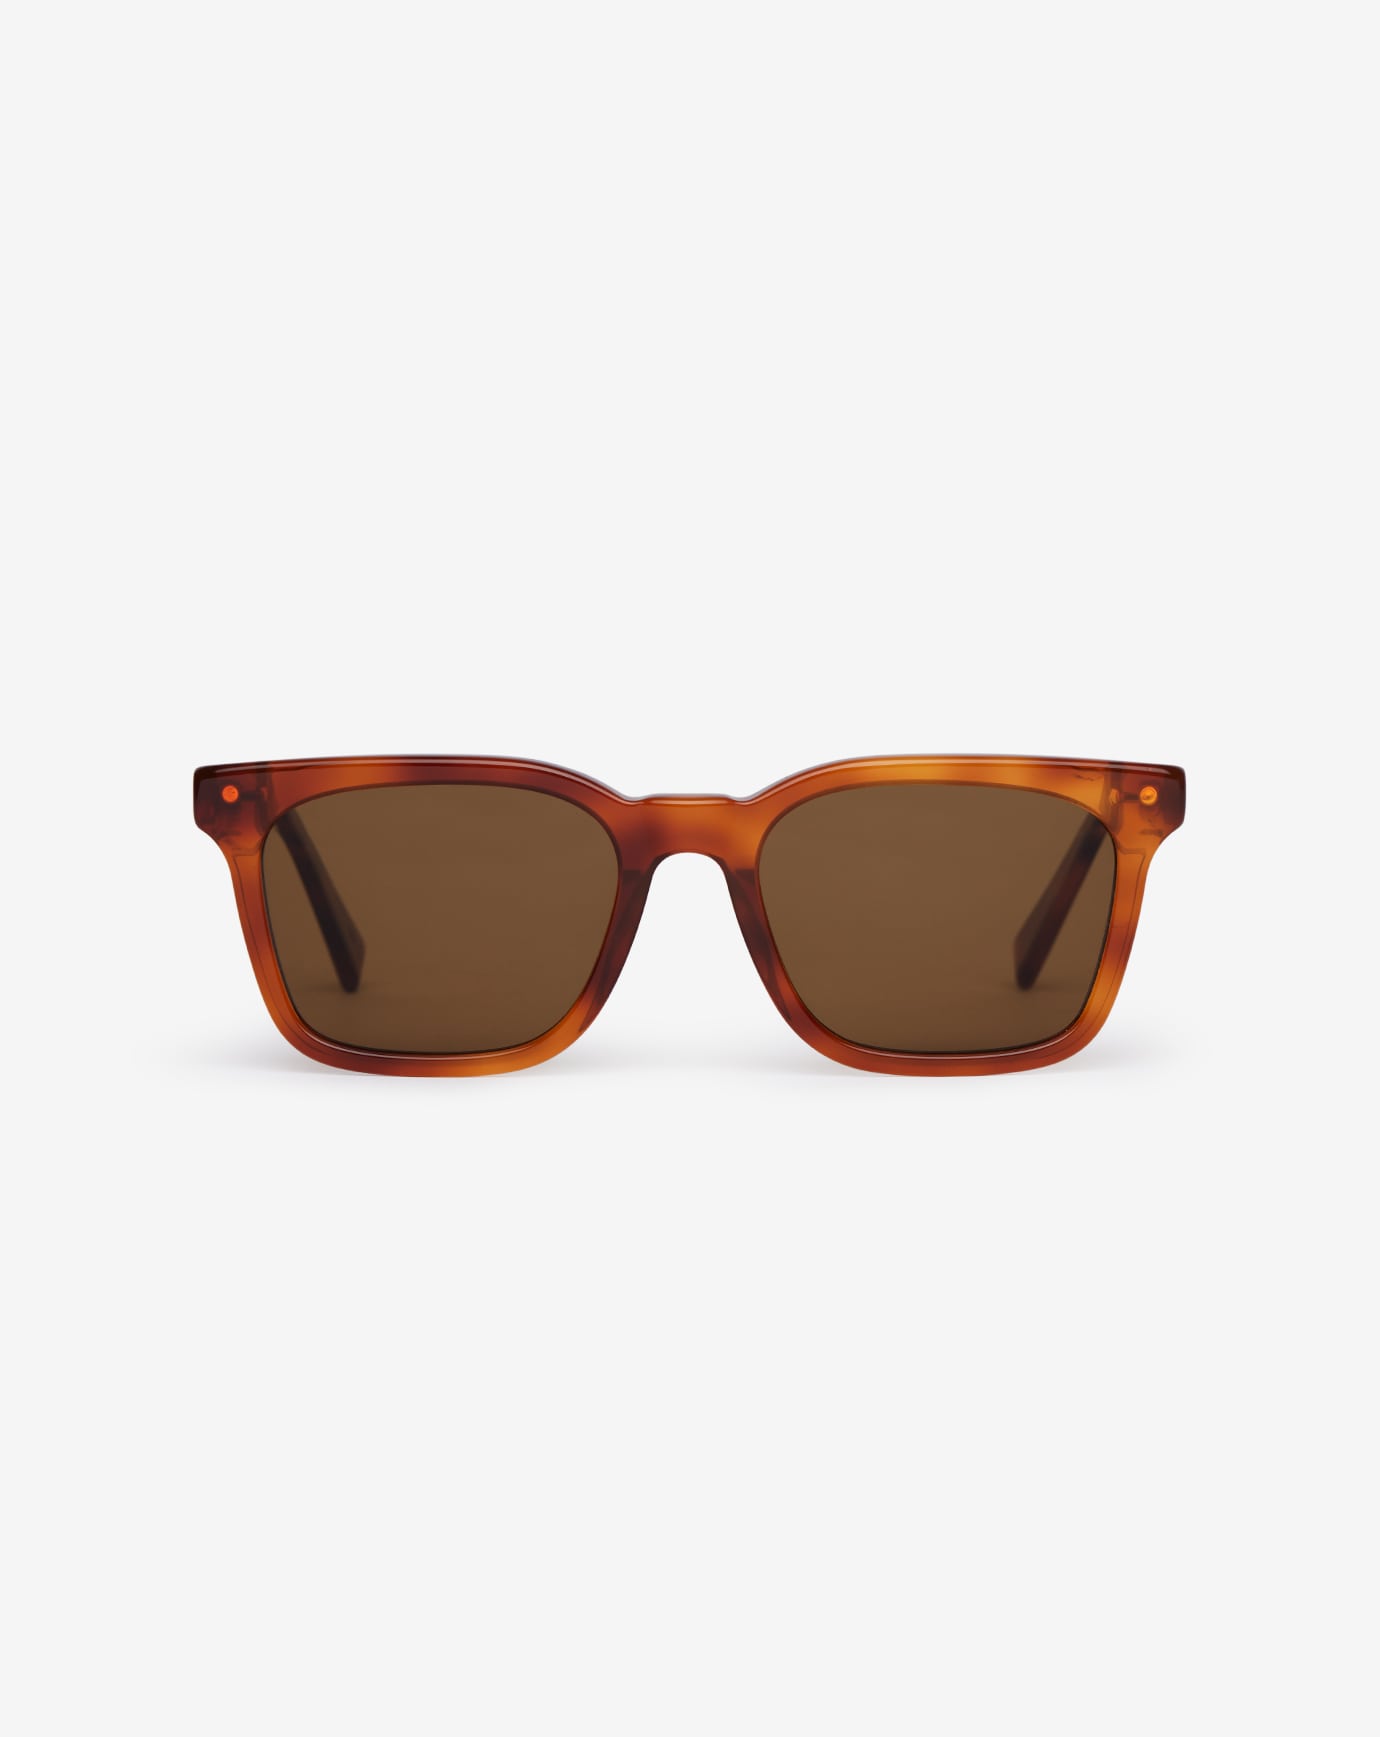 Related Product - SEACLIFF SUNGLASSES